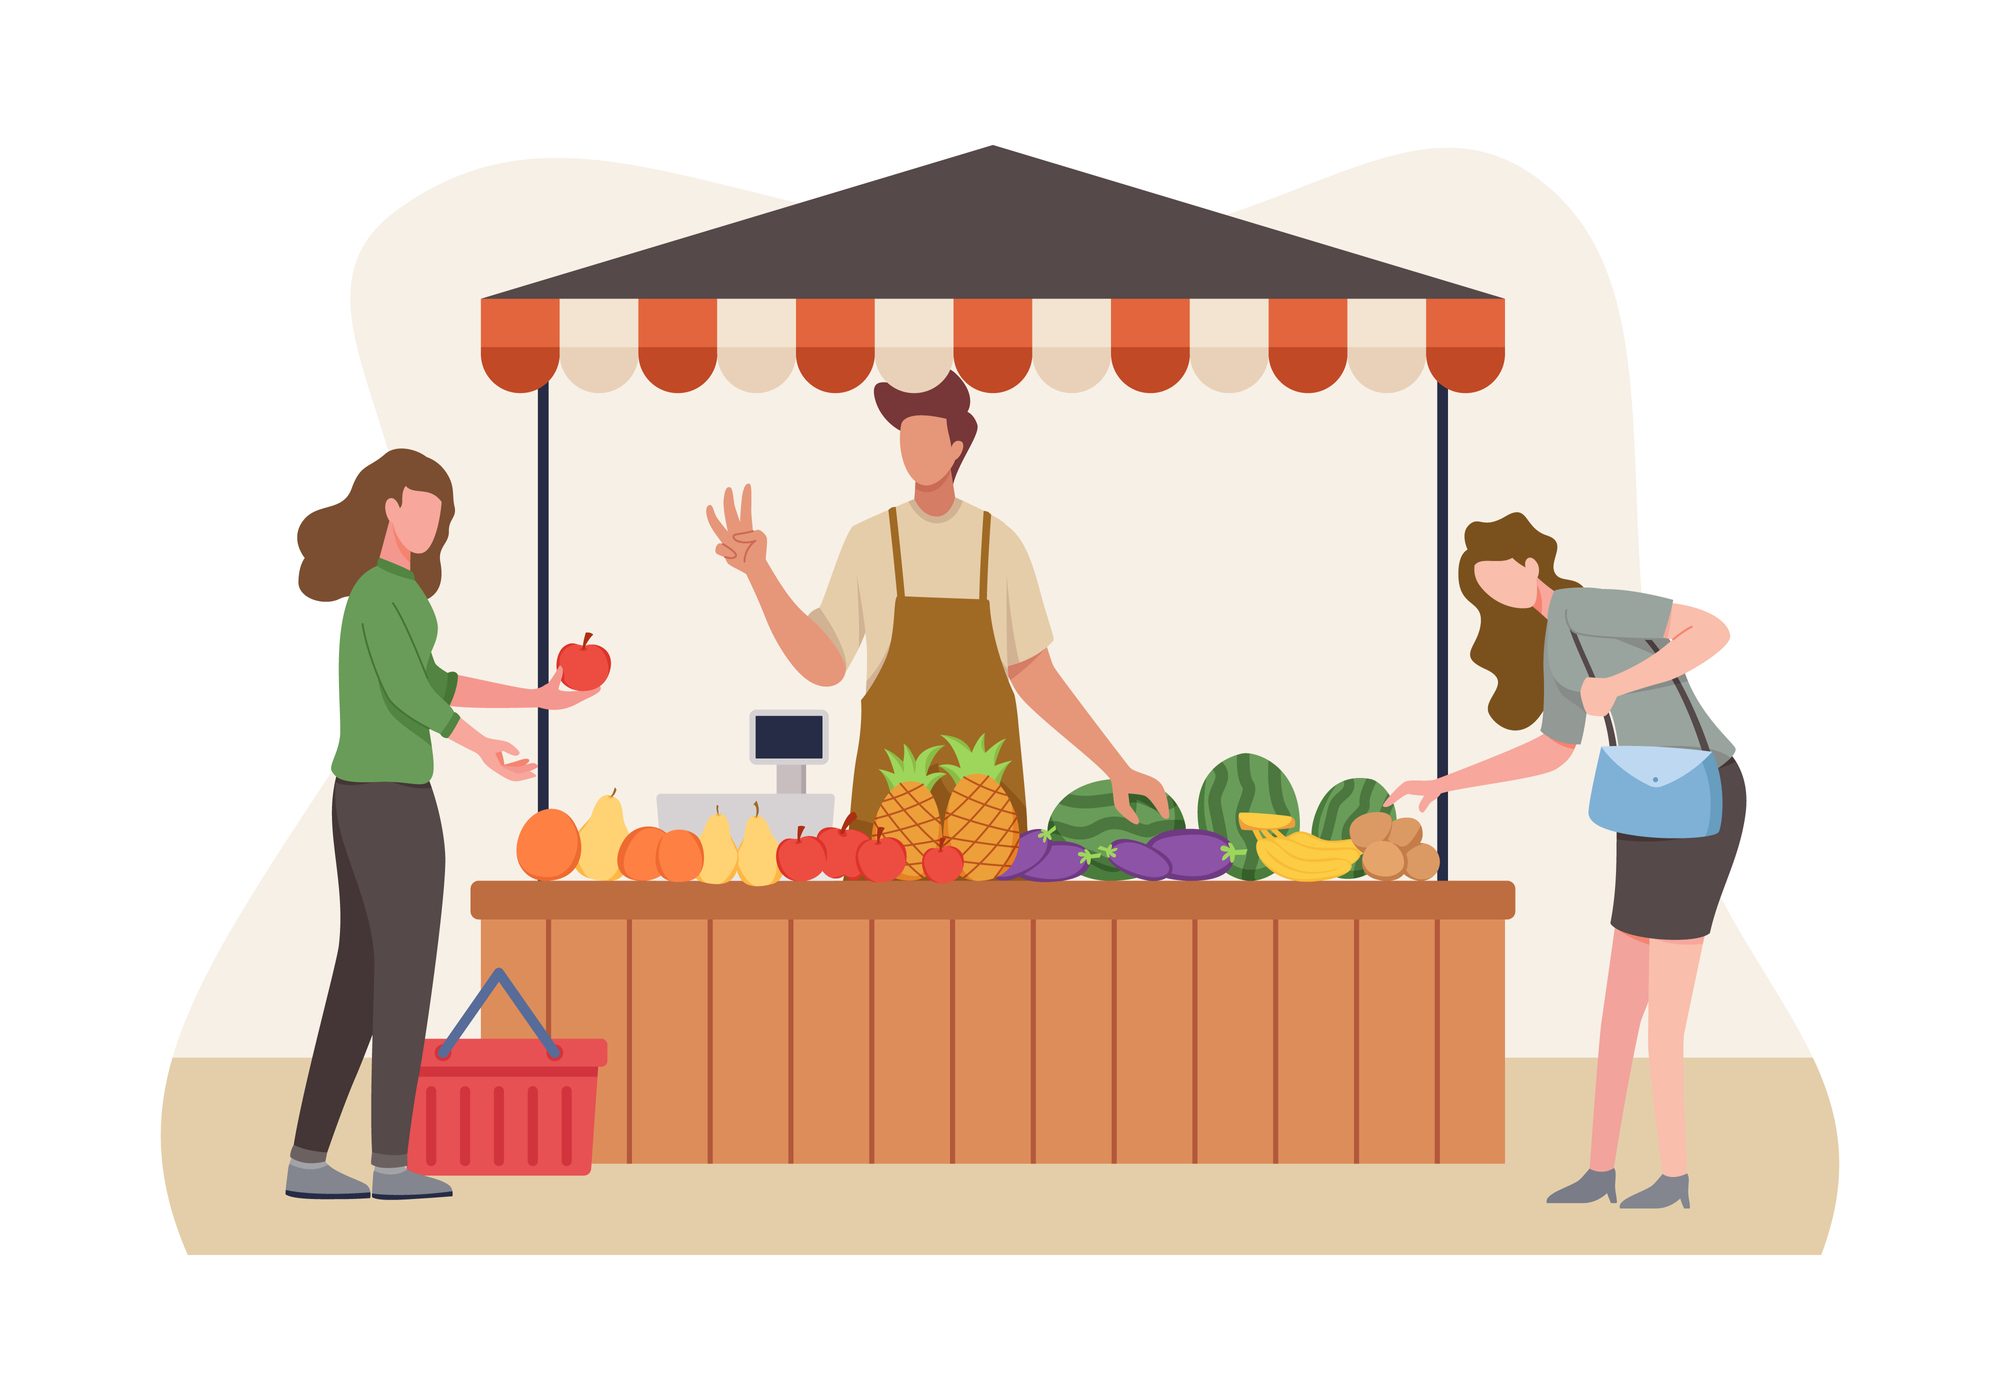 Vegetable and fruit seller, Local farmer sell their crops. Market stalls business concept, Local market farmer shops. Vector illustration in a flat style